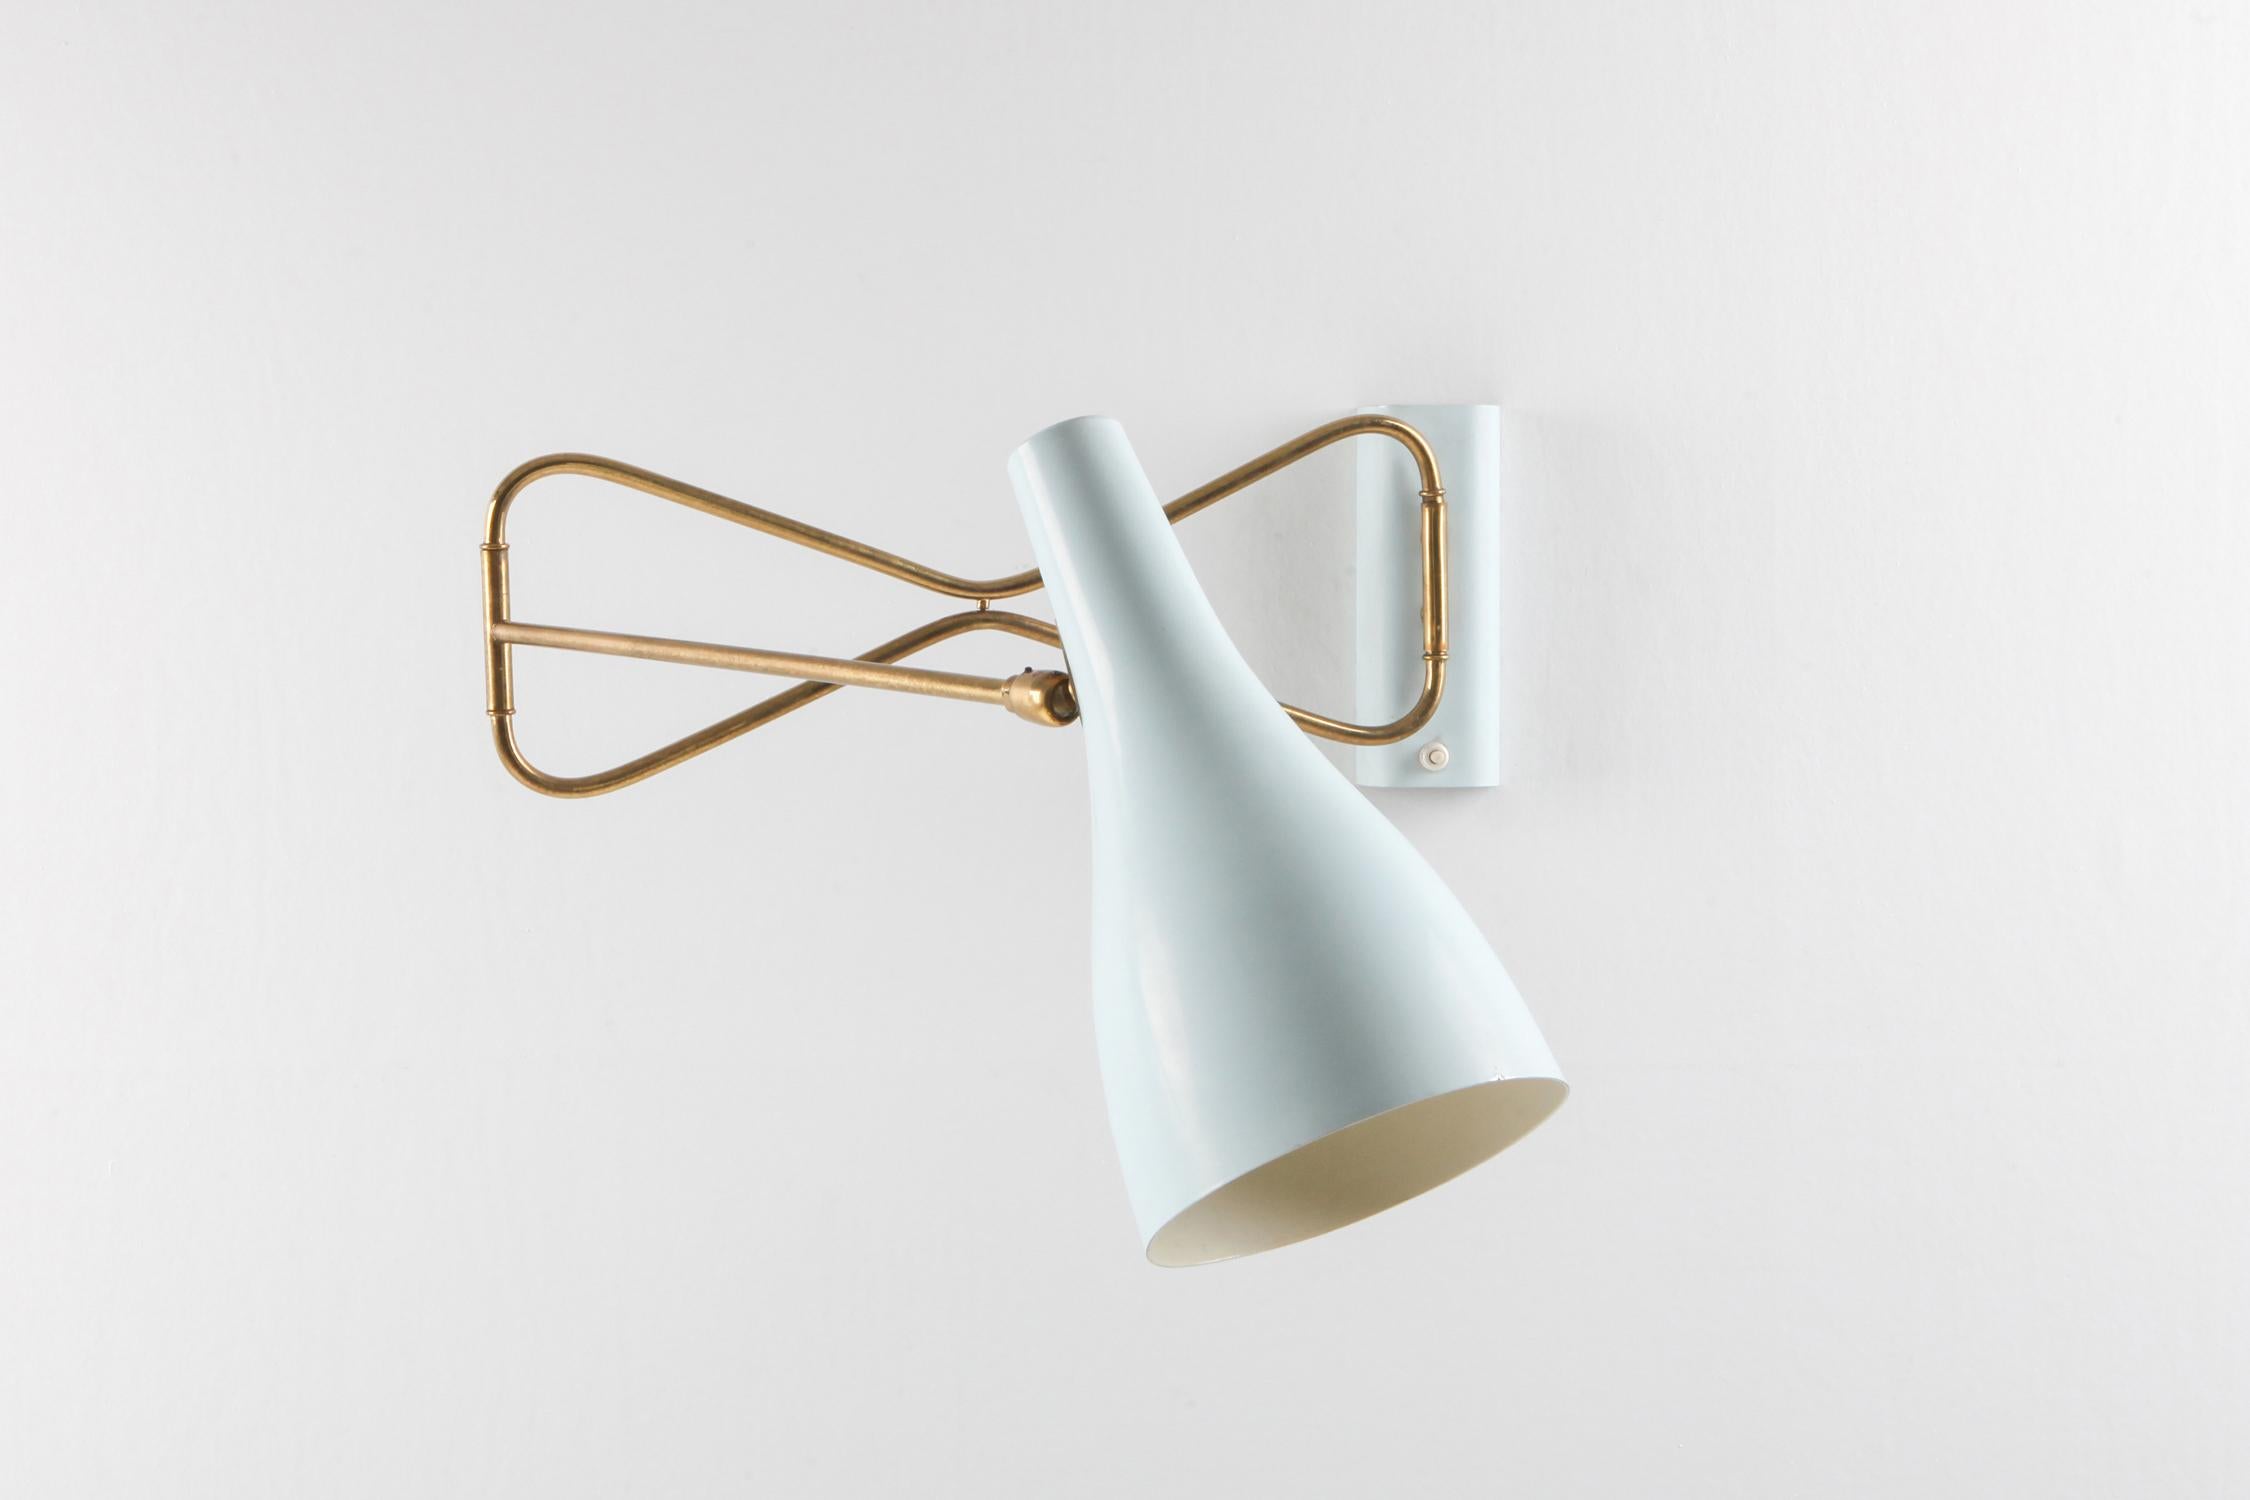 Wall sconce, the light fixture is affixed to a wall in such a way that it uses only the wall for support where the light is directed downwards, but flexible. 

Italian design, the 1950s. 

A combination of the colour baby blue and brass, that